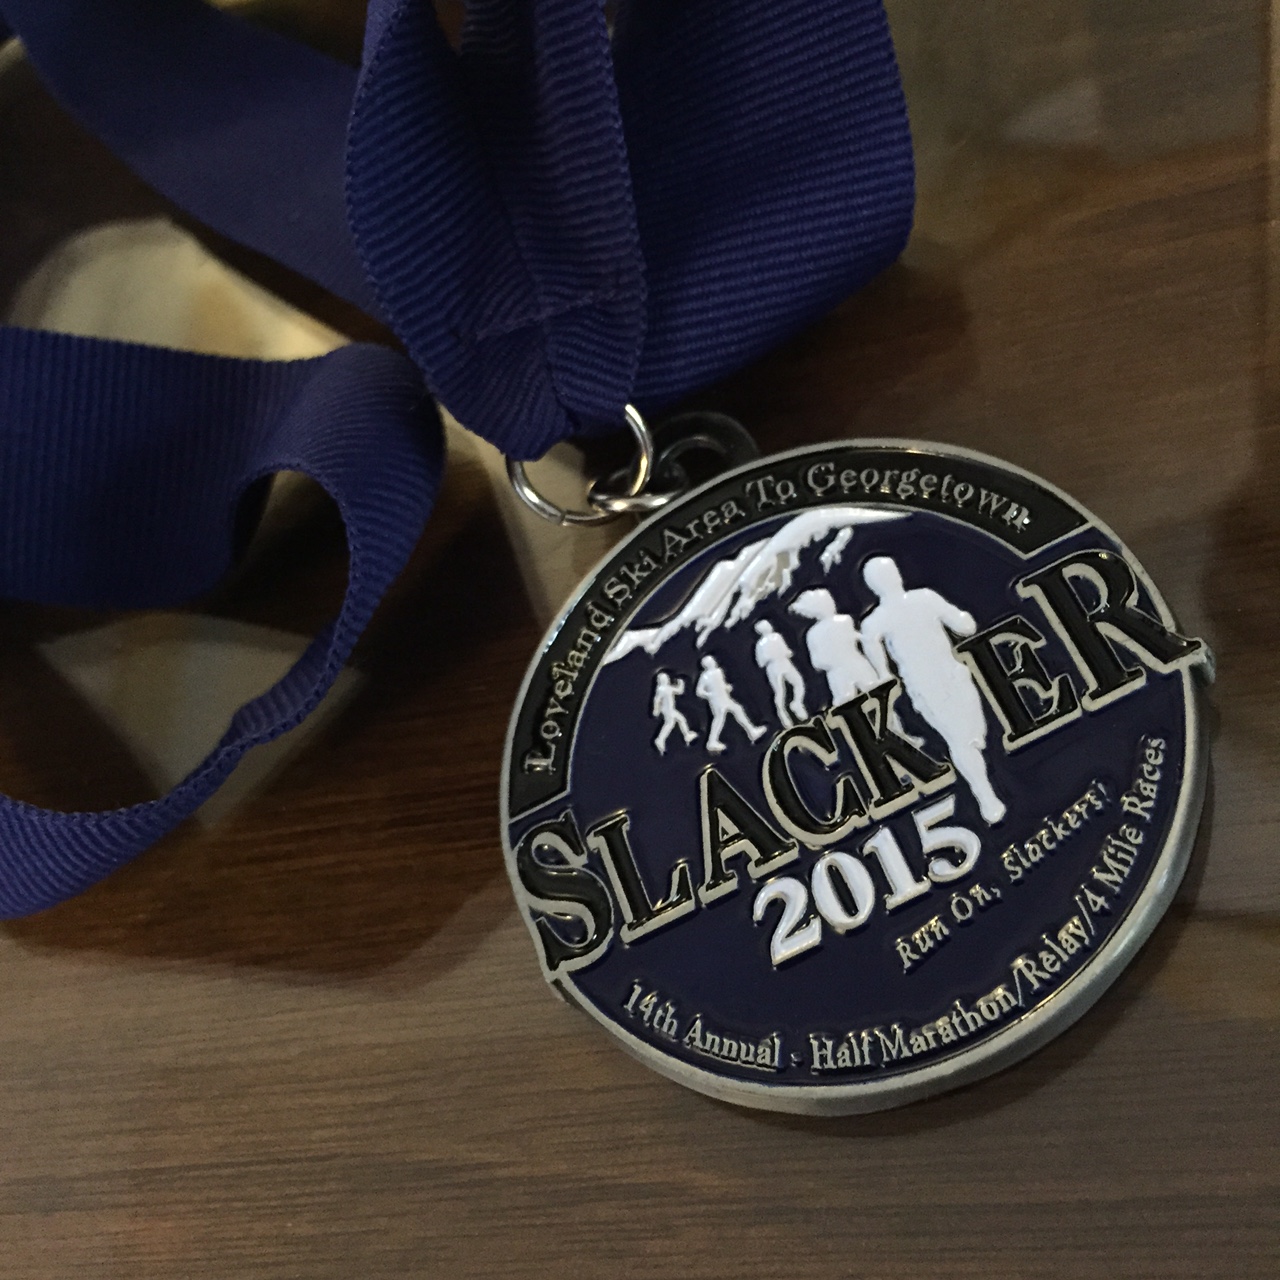 Half Marathon Medals Races Running Awards 2 and 5 Per Pack-Great for Marathon Awards